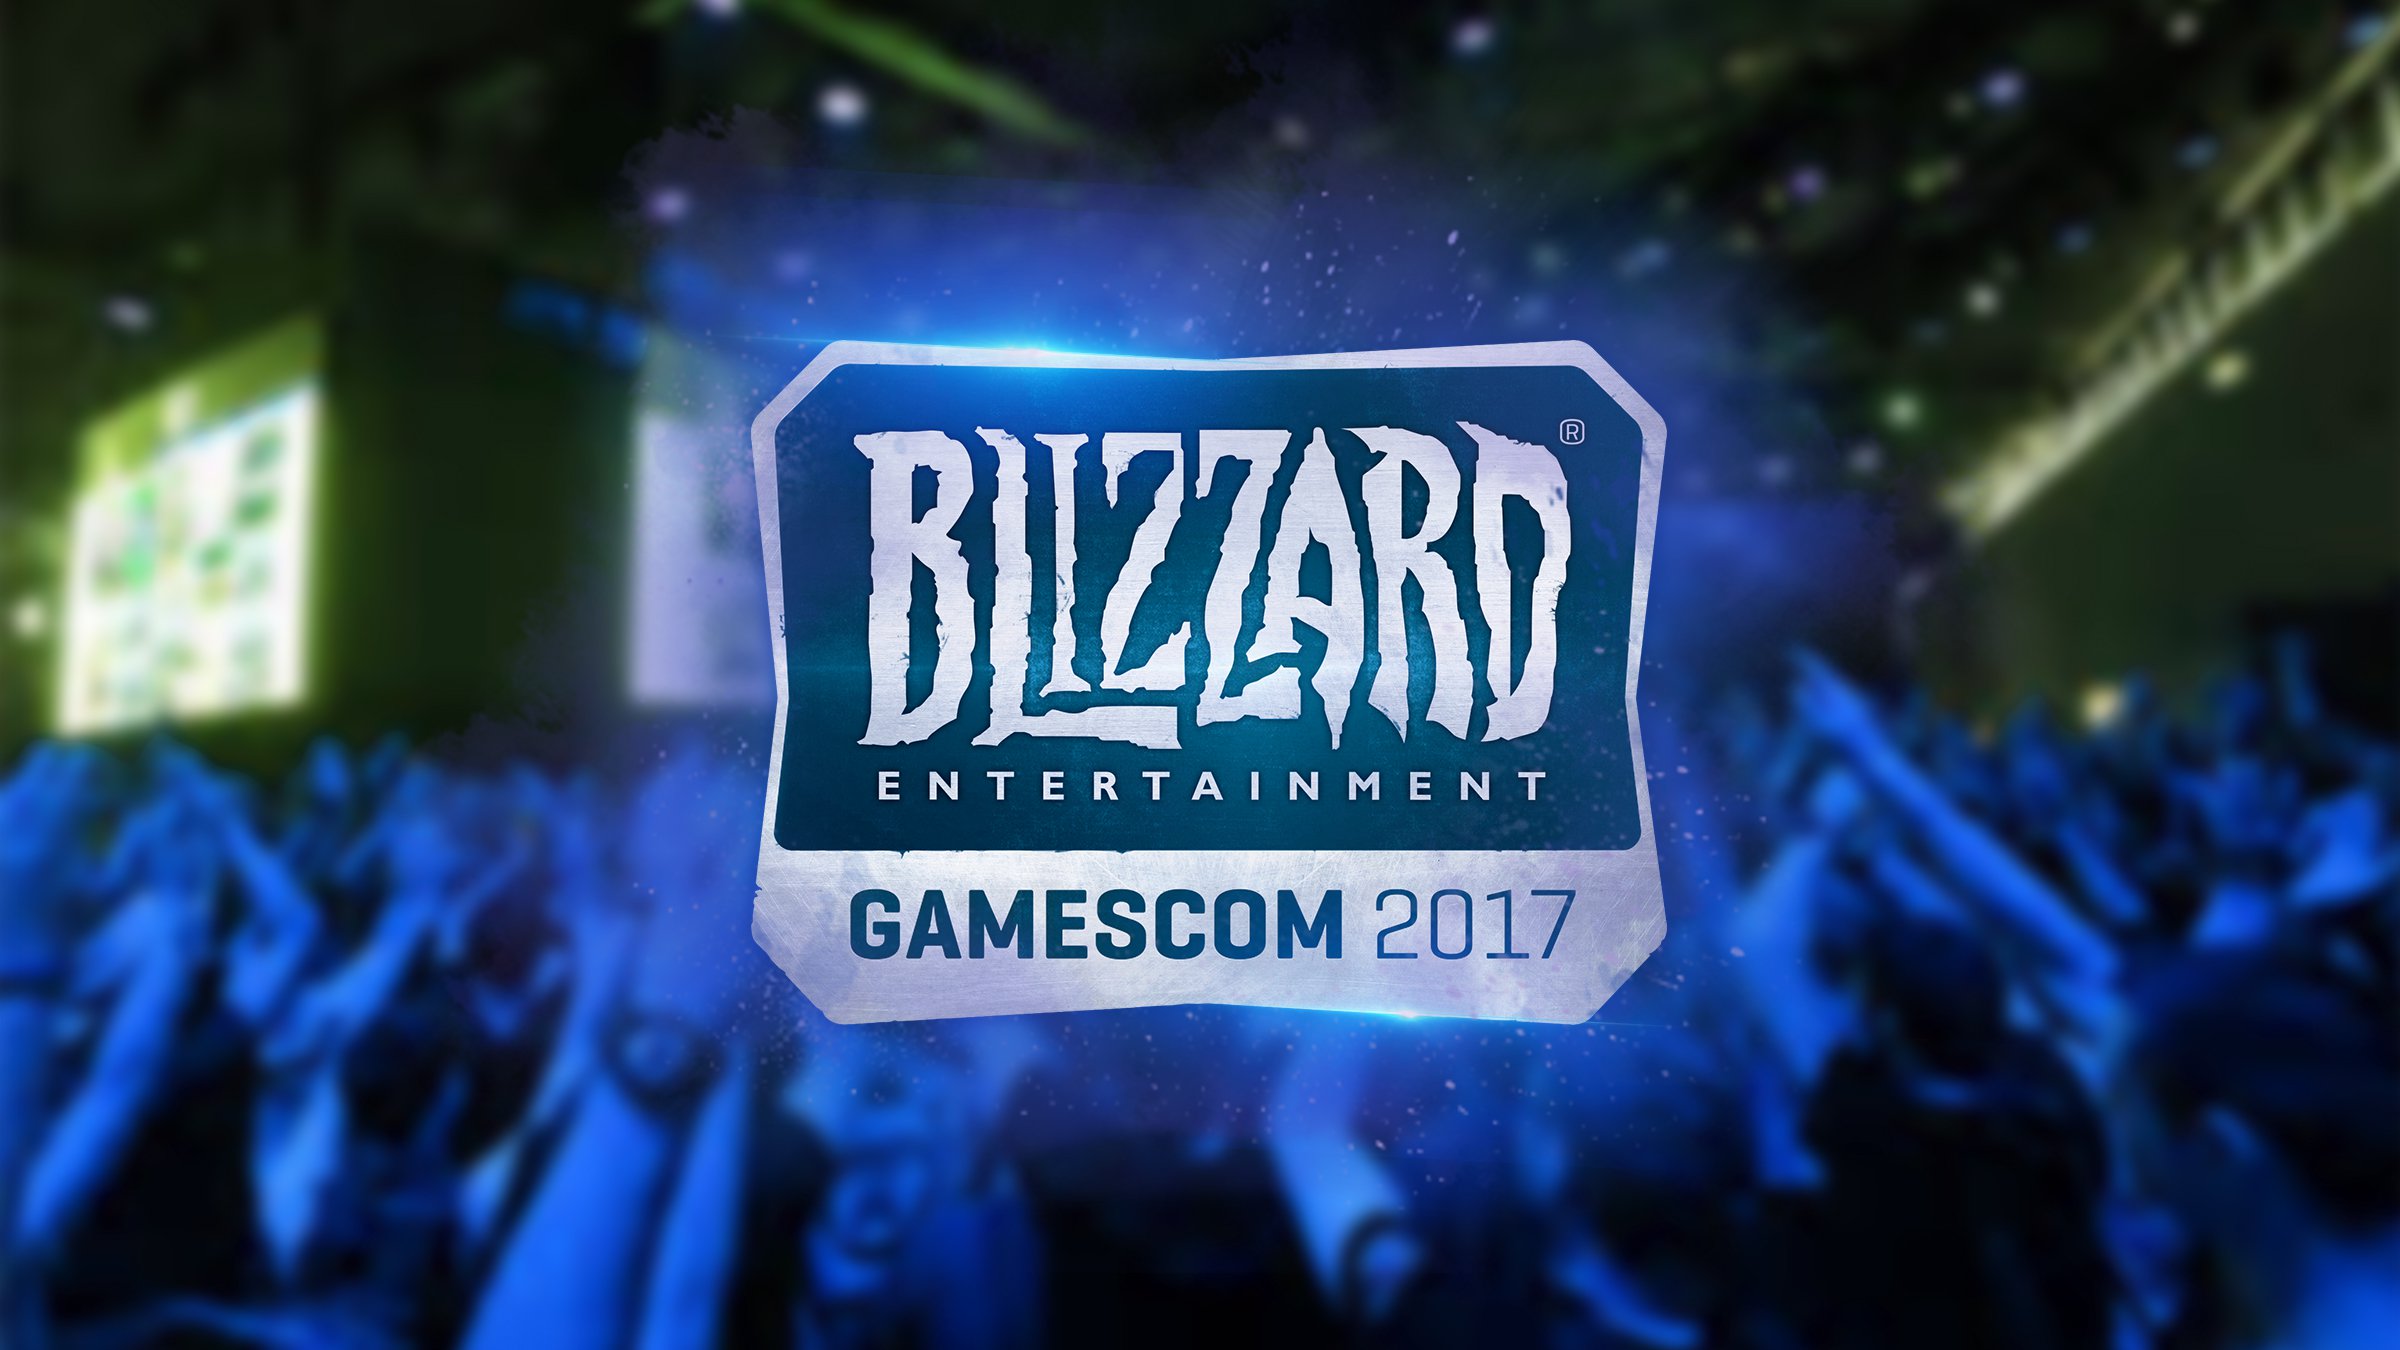 #Gamescom | End of the conference, Blizzard